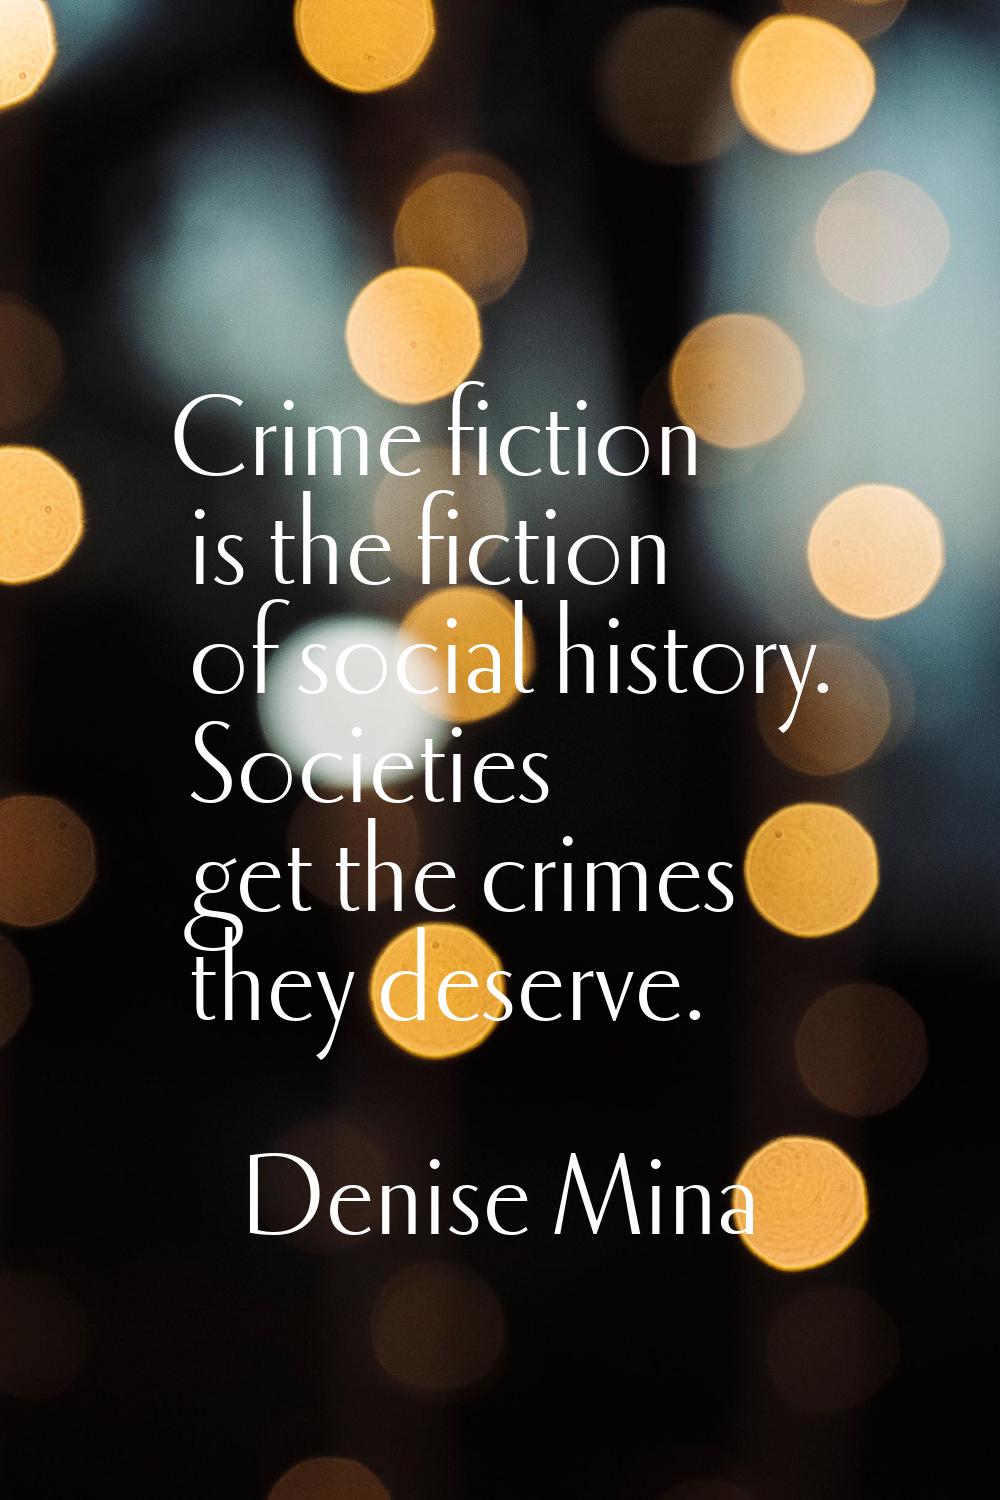 Crime fiction is the fiction of social history. Societies get the crimes they deserve.